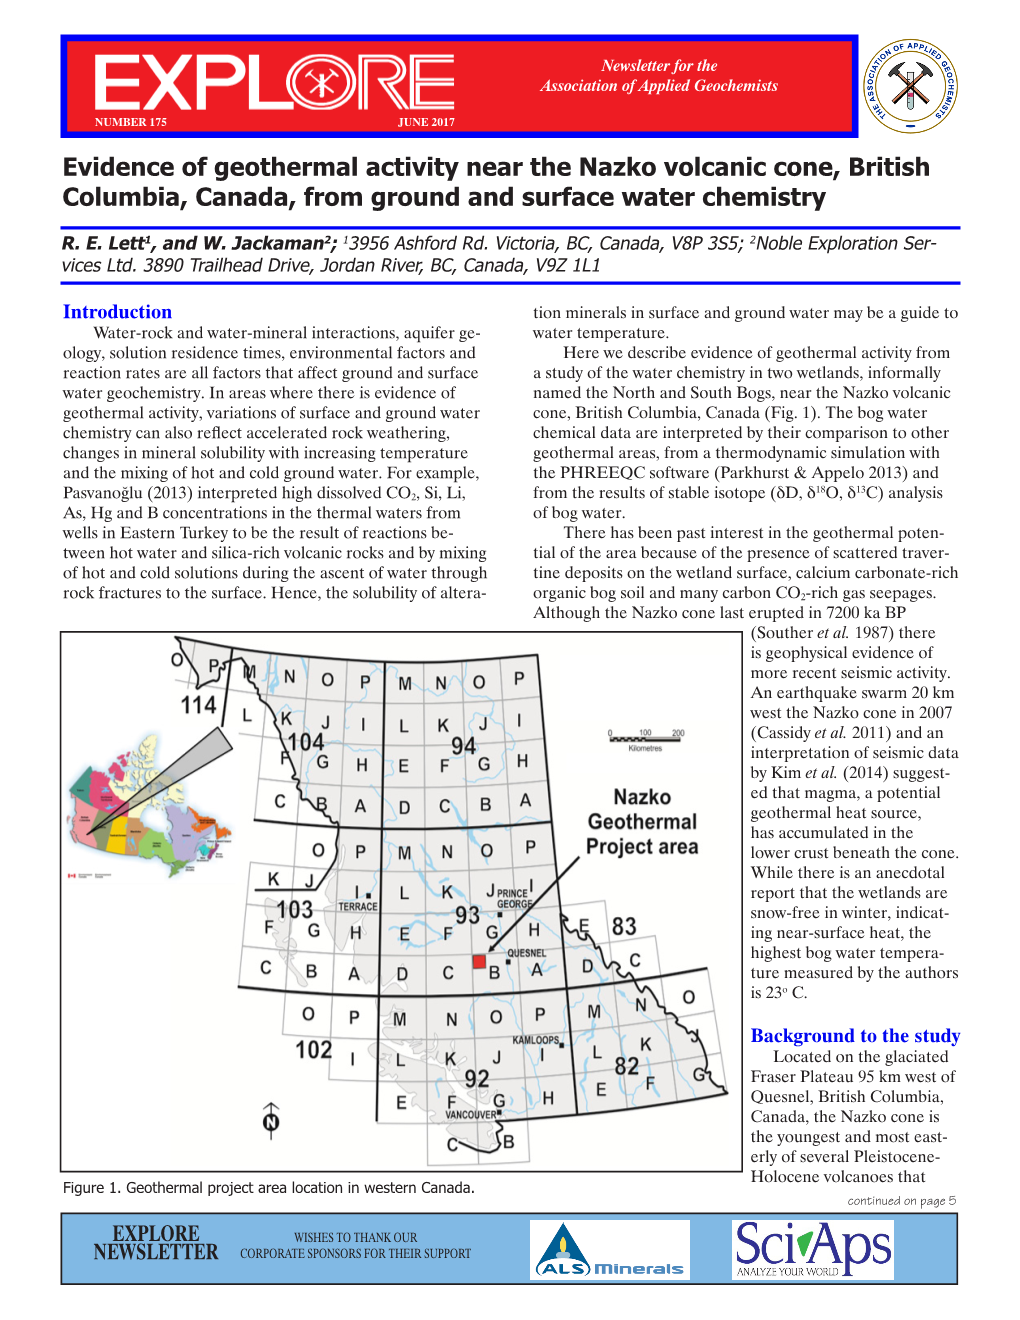 Evidence of Geothermal Activity Near the Nazko Volcanic Cone, British Columbia, Canada, from Ground and Surface Water Chemistry